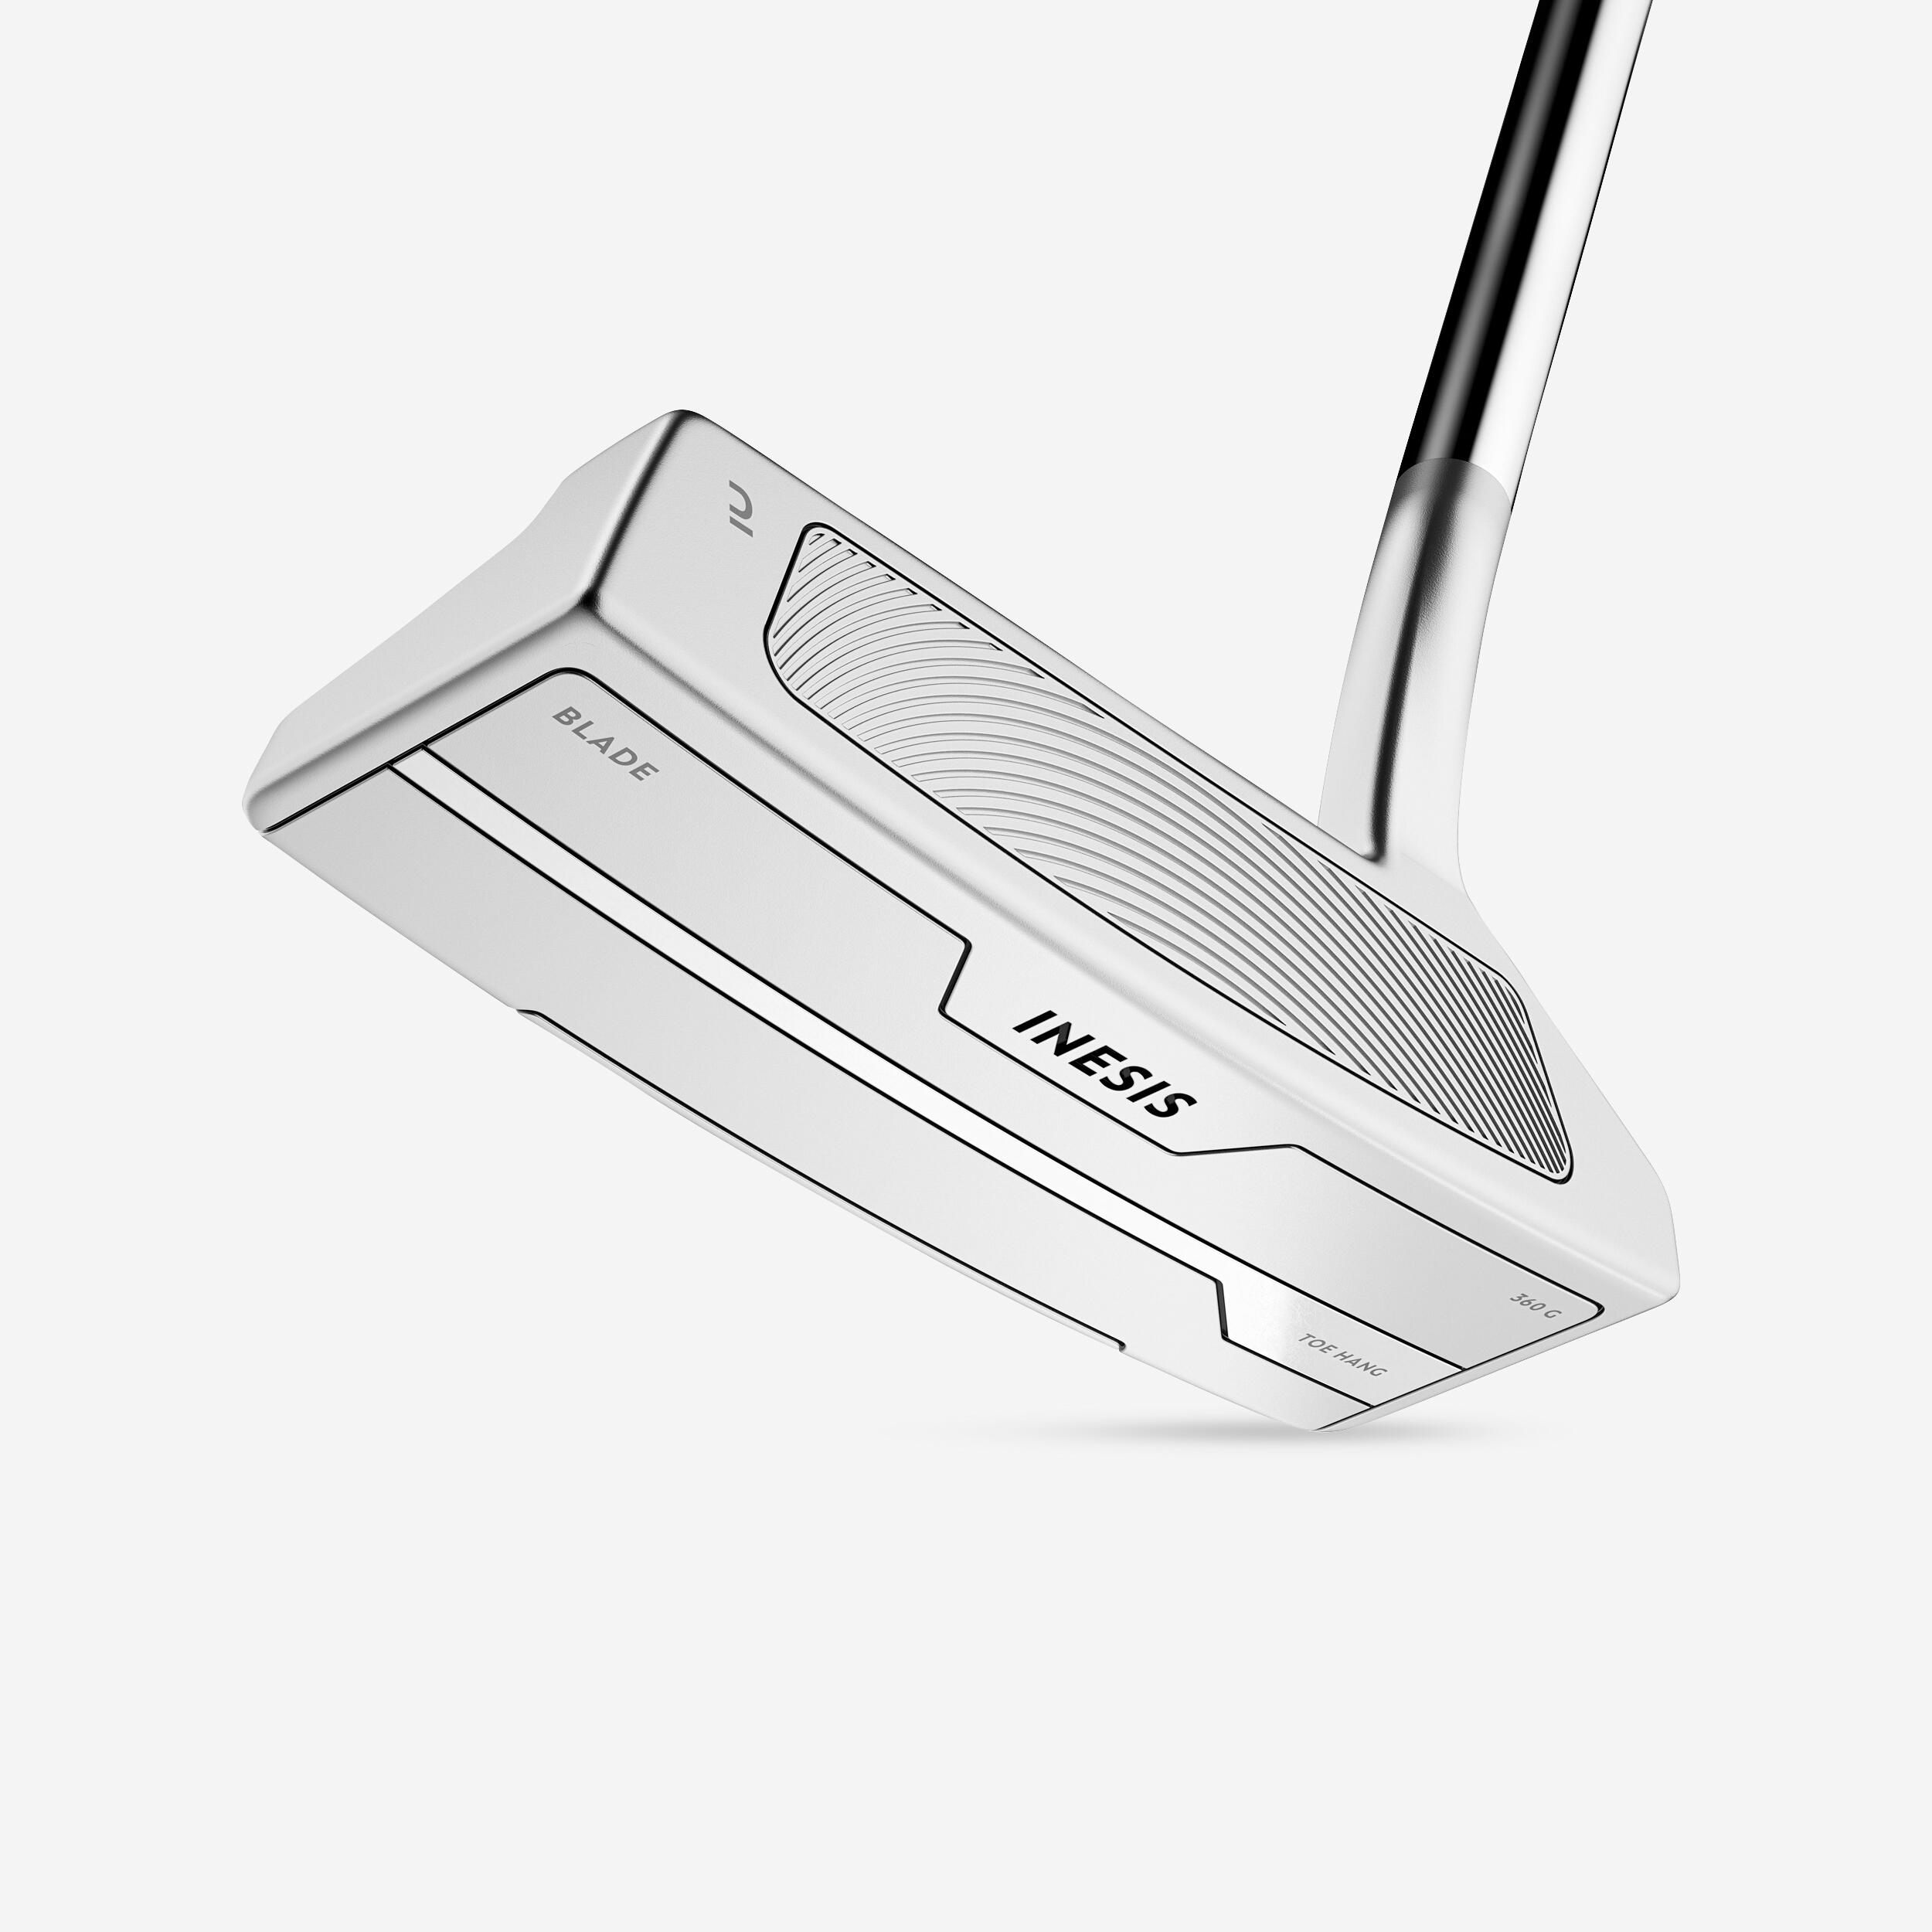 Toe hang golf putter right handed - INESIS blade 1/7